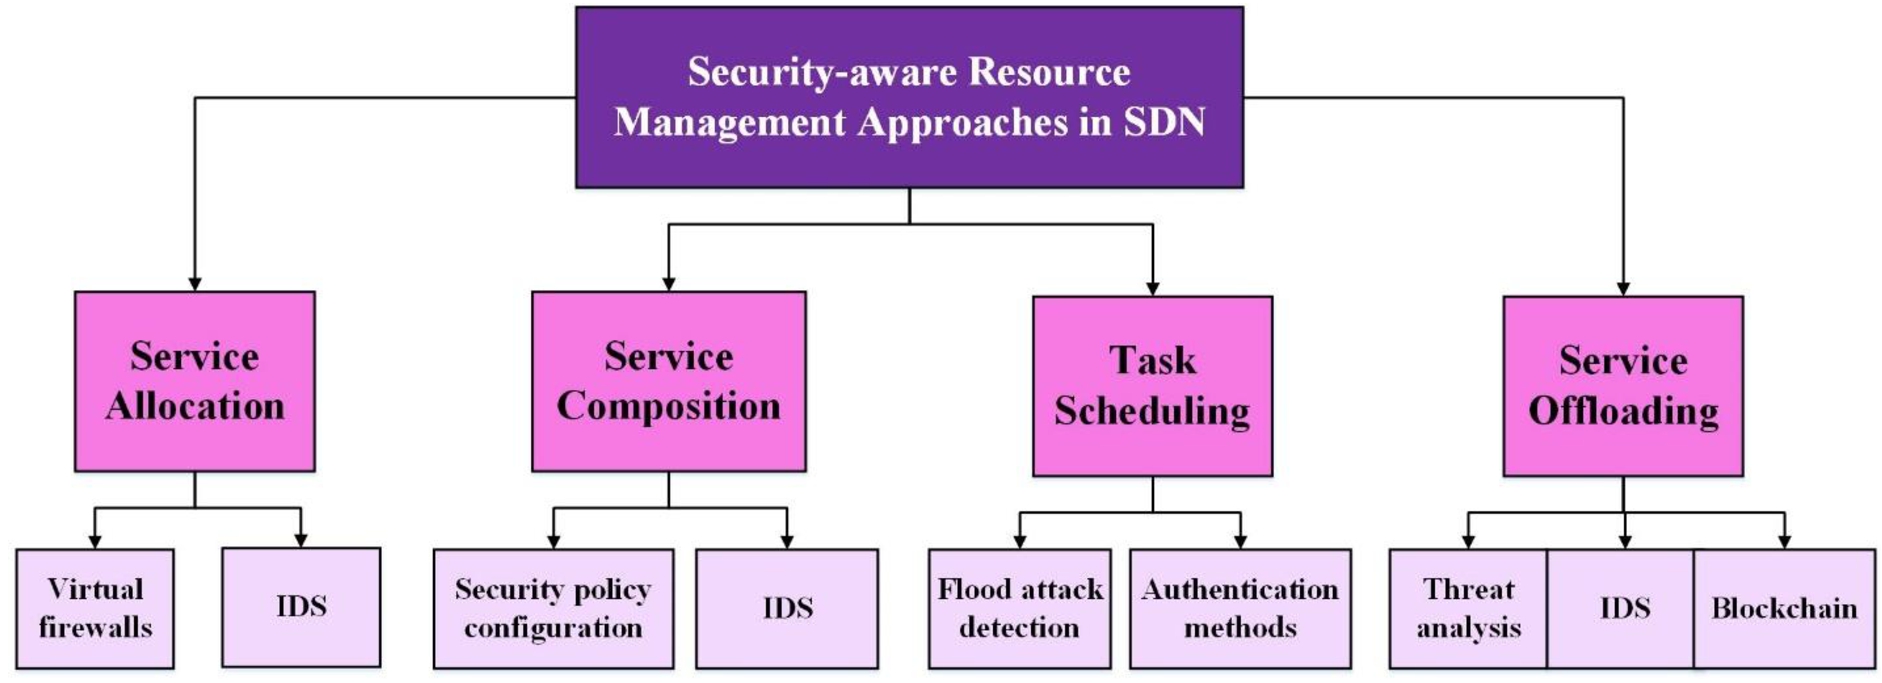 Taxonomy of the security-aware management approaches.